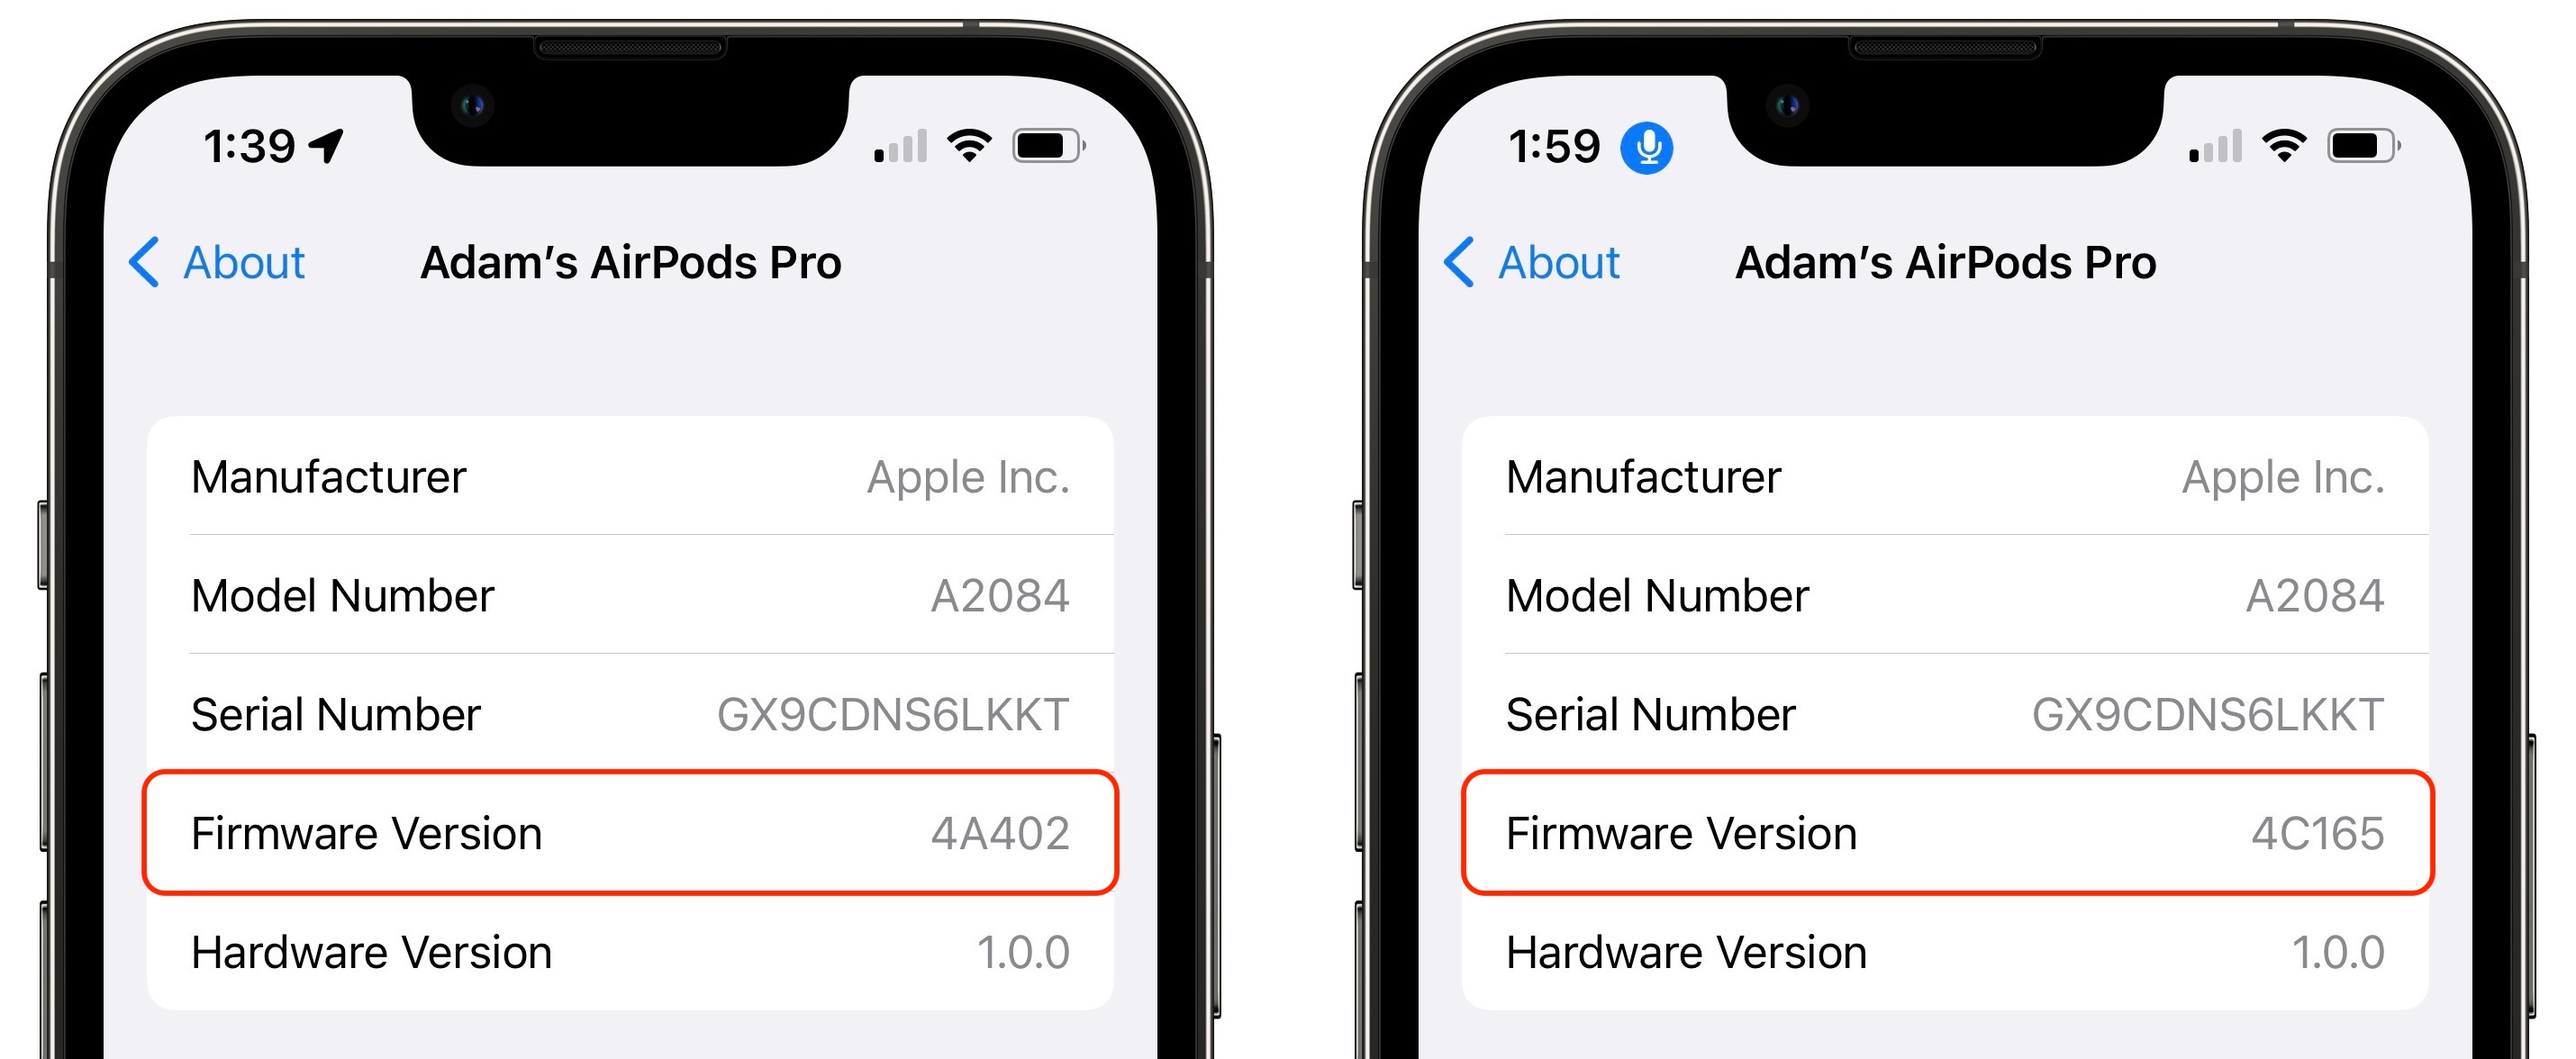 Apple AirPods Firmware to 4C165 - TidBITS